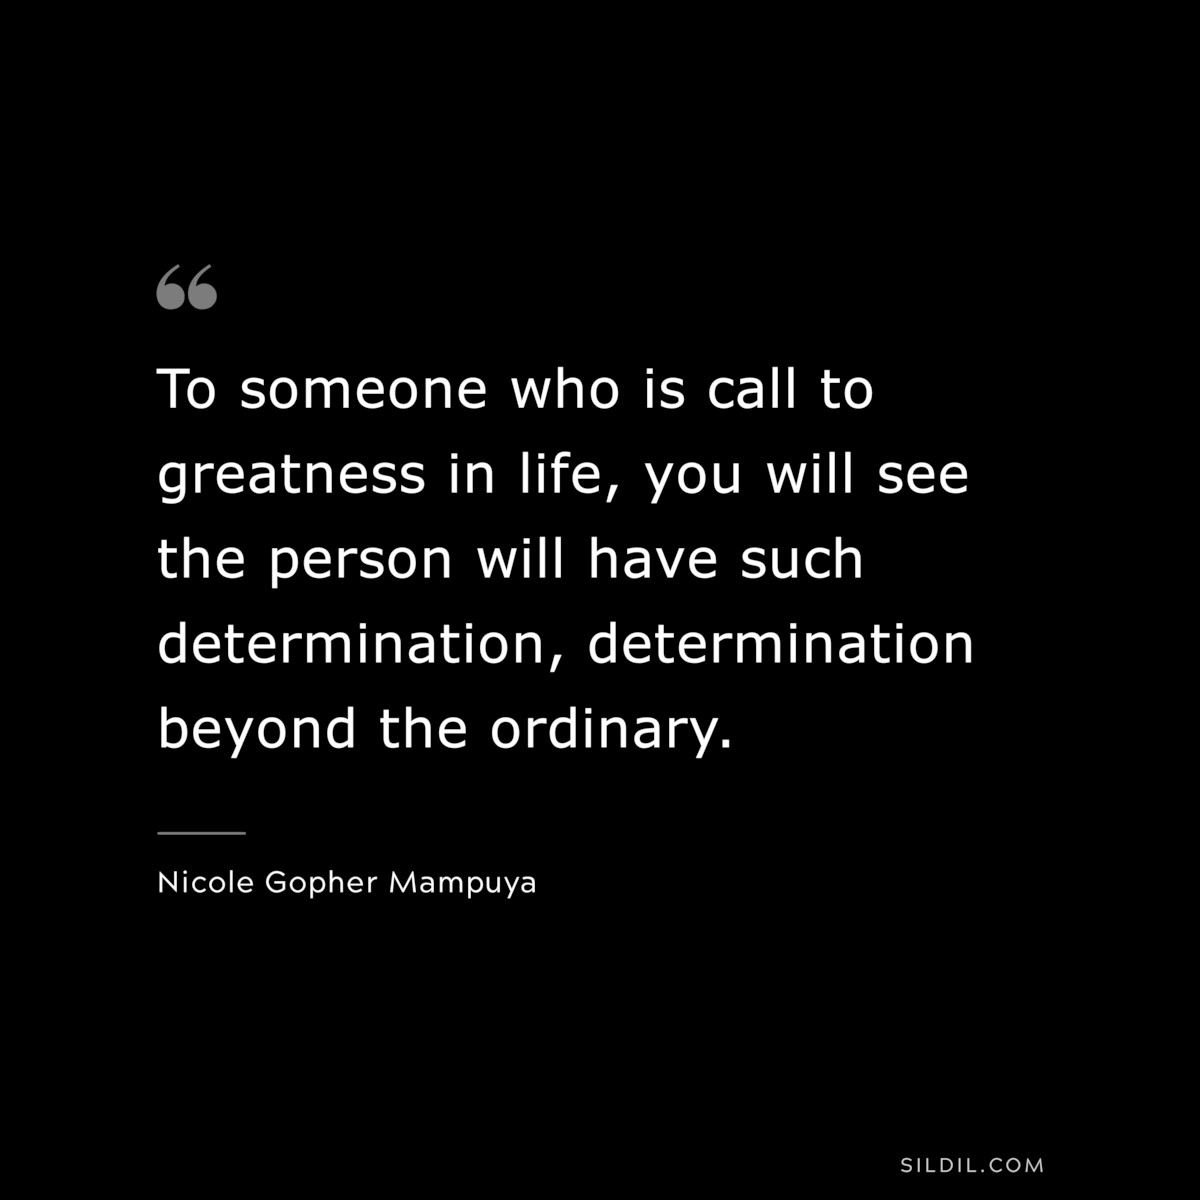 To someone who is call to greatness in life, you will see the person will have such determination, determination beyond the ordinary. ― Nicole Gopher Mampuya